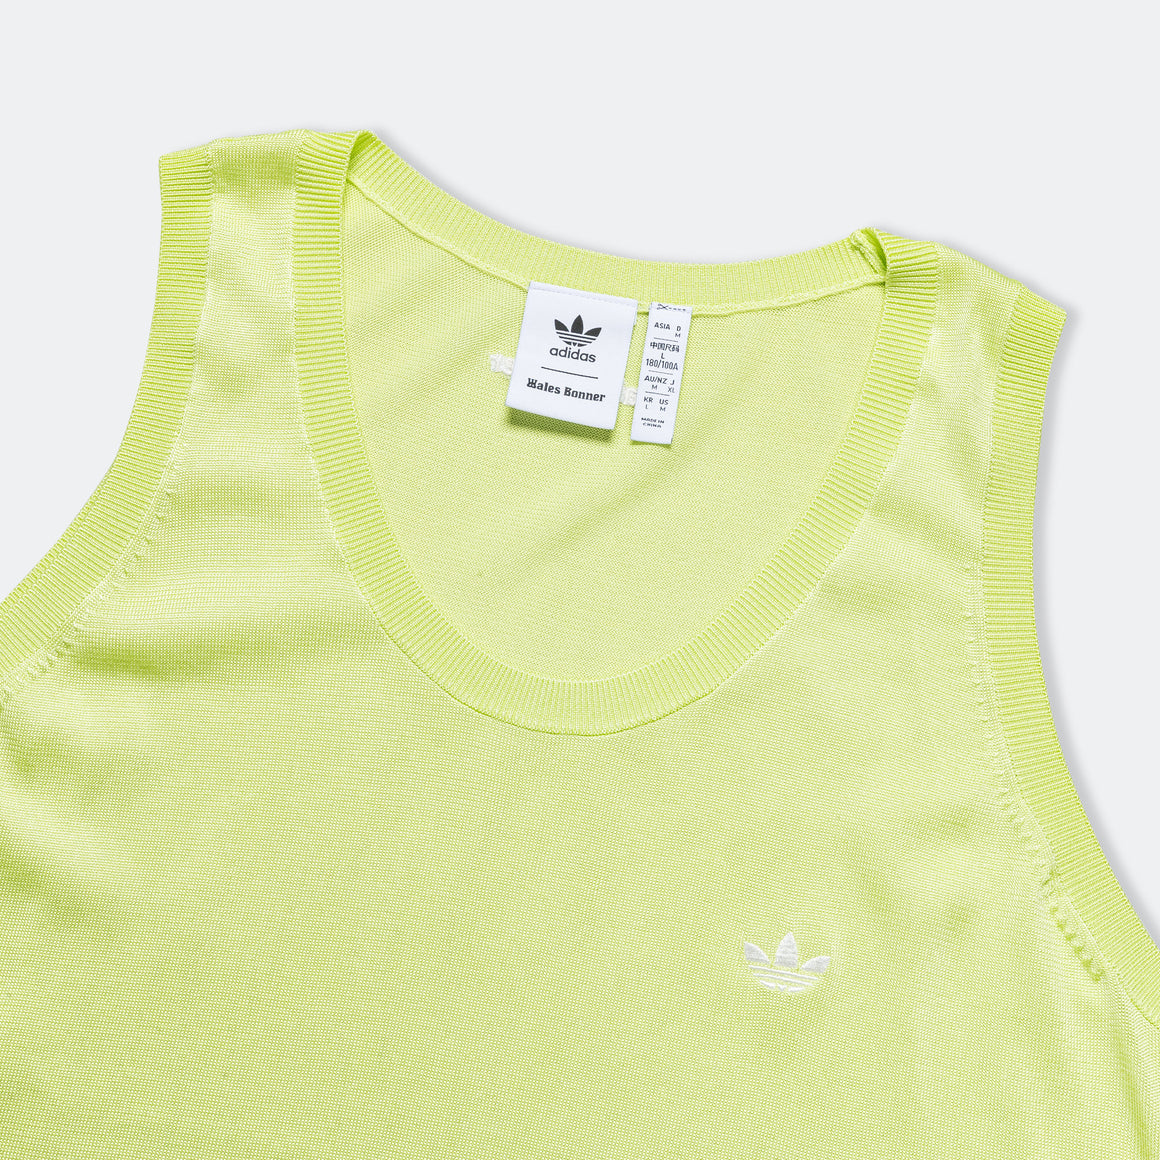 adidas - Knit Vest x Wales Bonner - Frozen Yellow/Core White - UP THERE